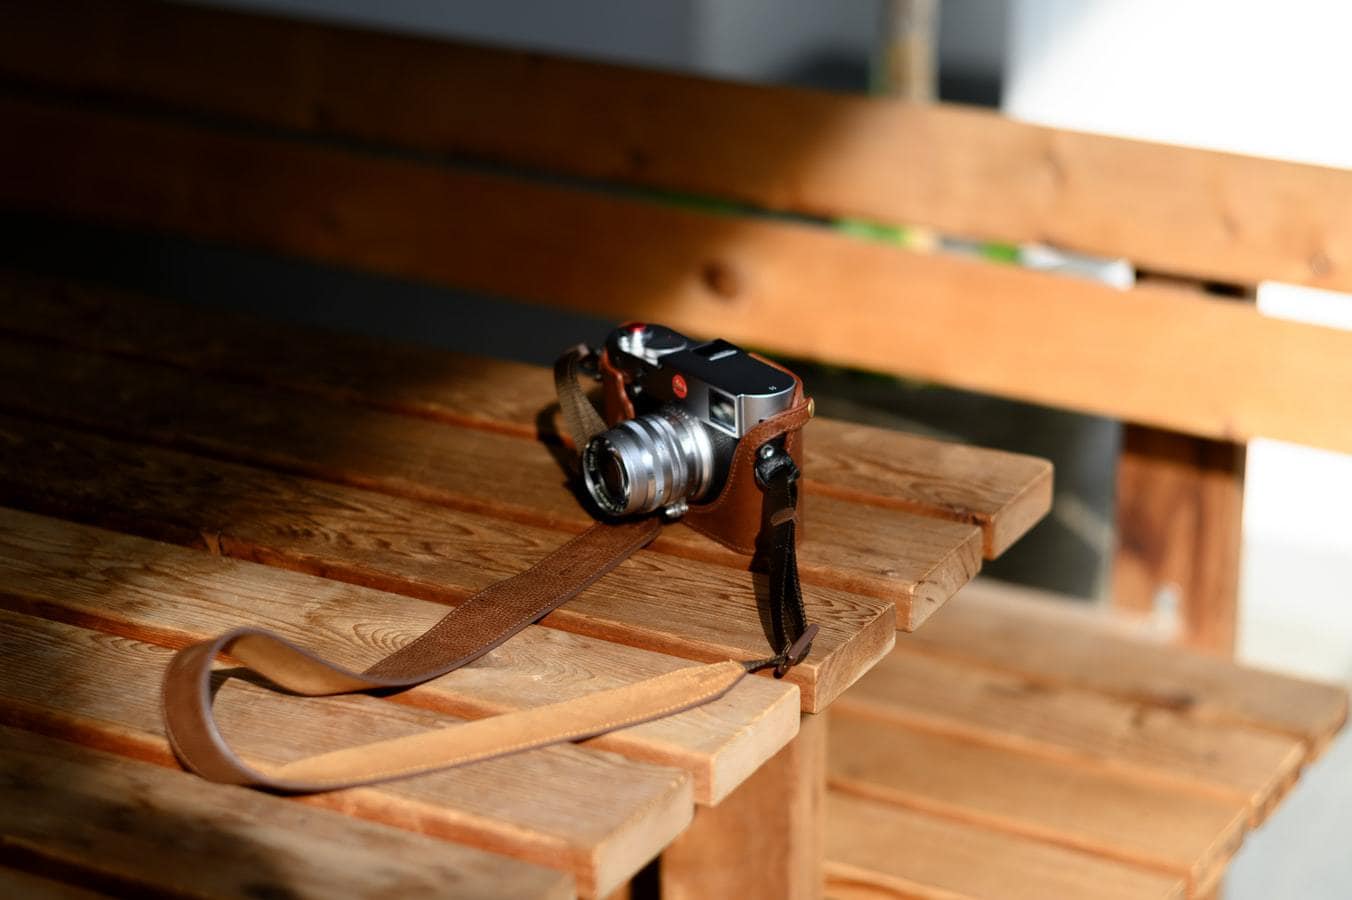 35mm Camera on wooden table